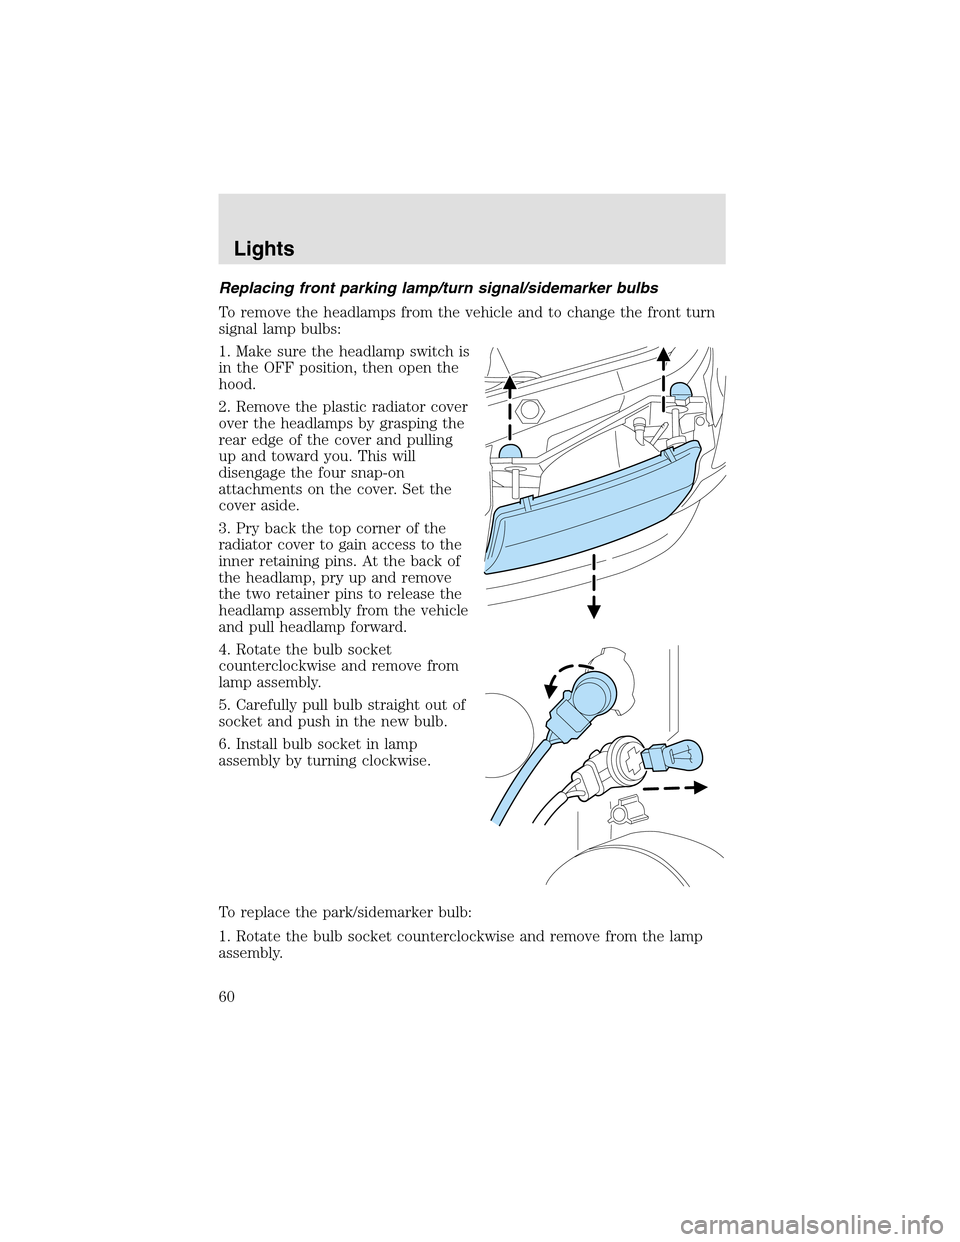 LINCOLN AVIATOR 2003 Workshop Manual Replacing front parking lamp/turn signal/sidemarker bulbs
To remove the headlamps from the vehicle and to change the front turn
signal lampbulbs:
1. Make sure the headlampswitch is
in the OFF position